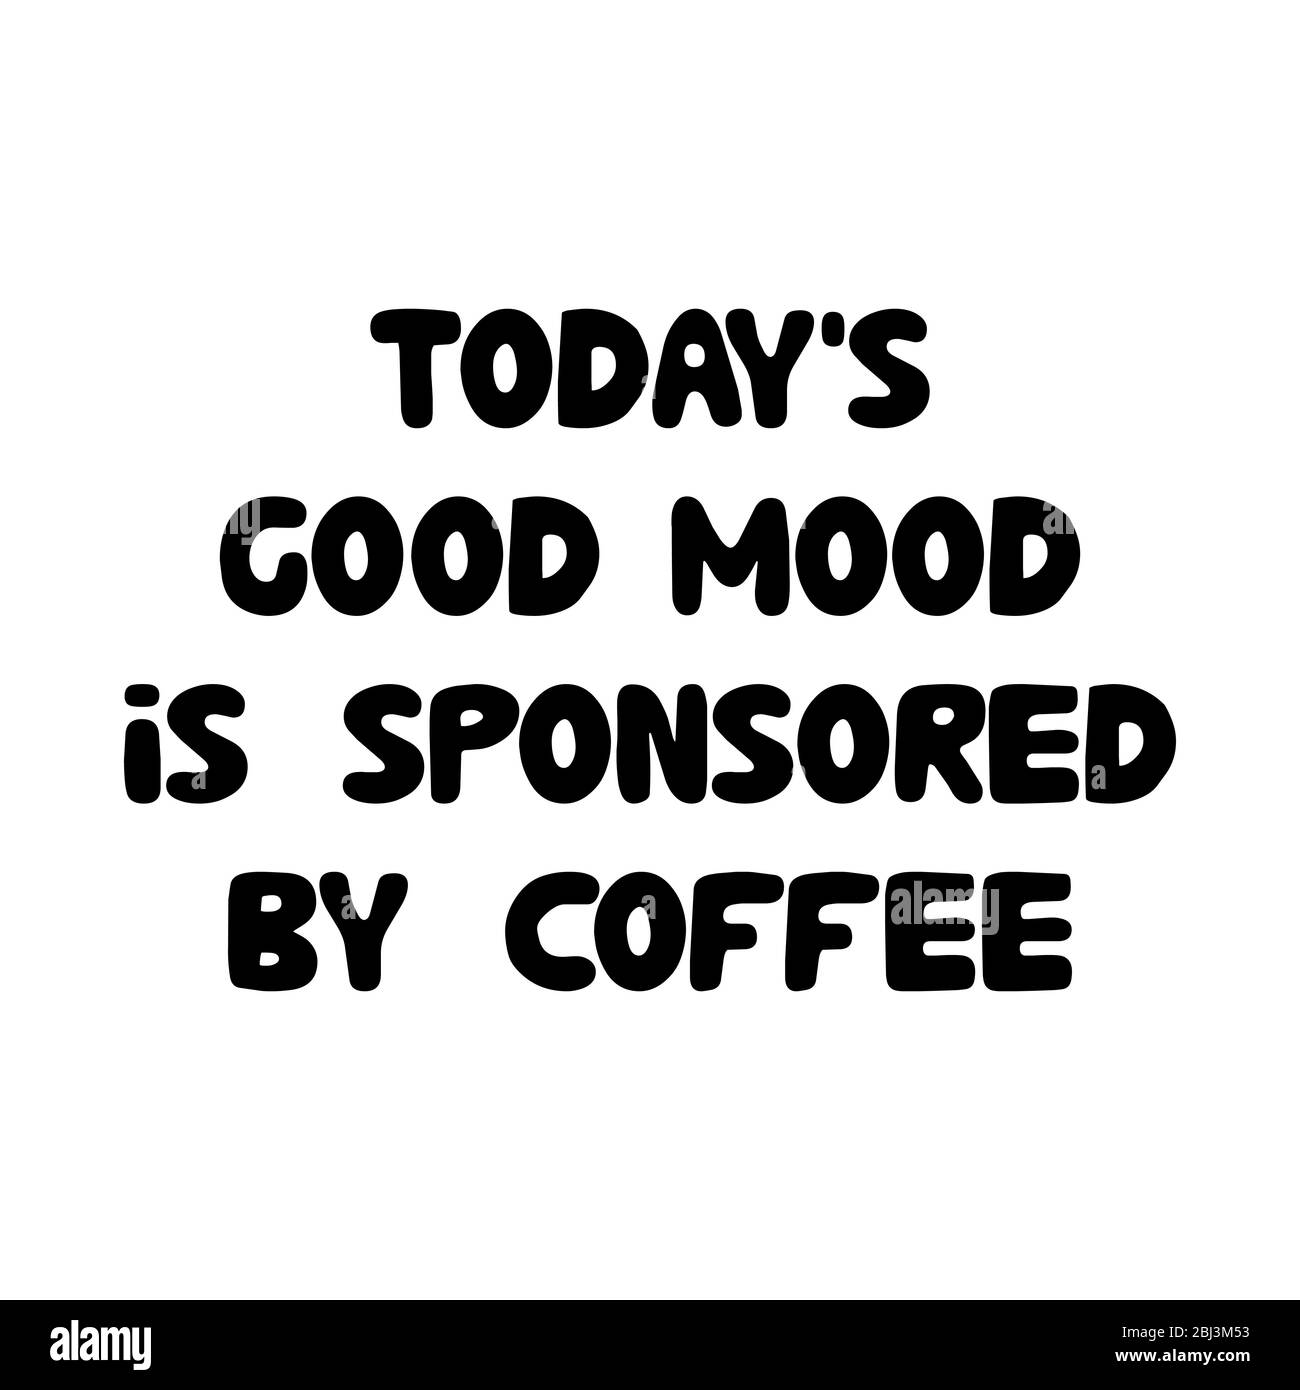 Todays good mood is sponsored by coffee. Cute hand drawn doodle bubble lettering. Isolated on white background. Vector stock illustration. Stock Vector